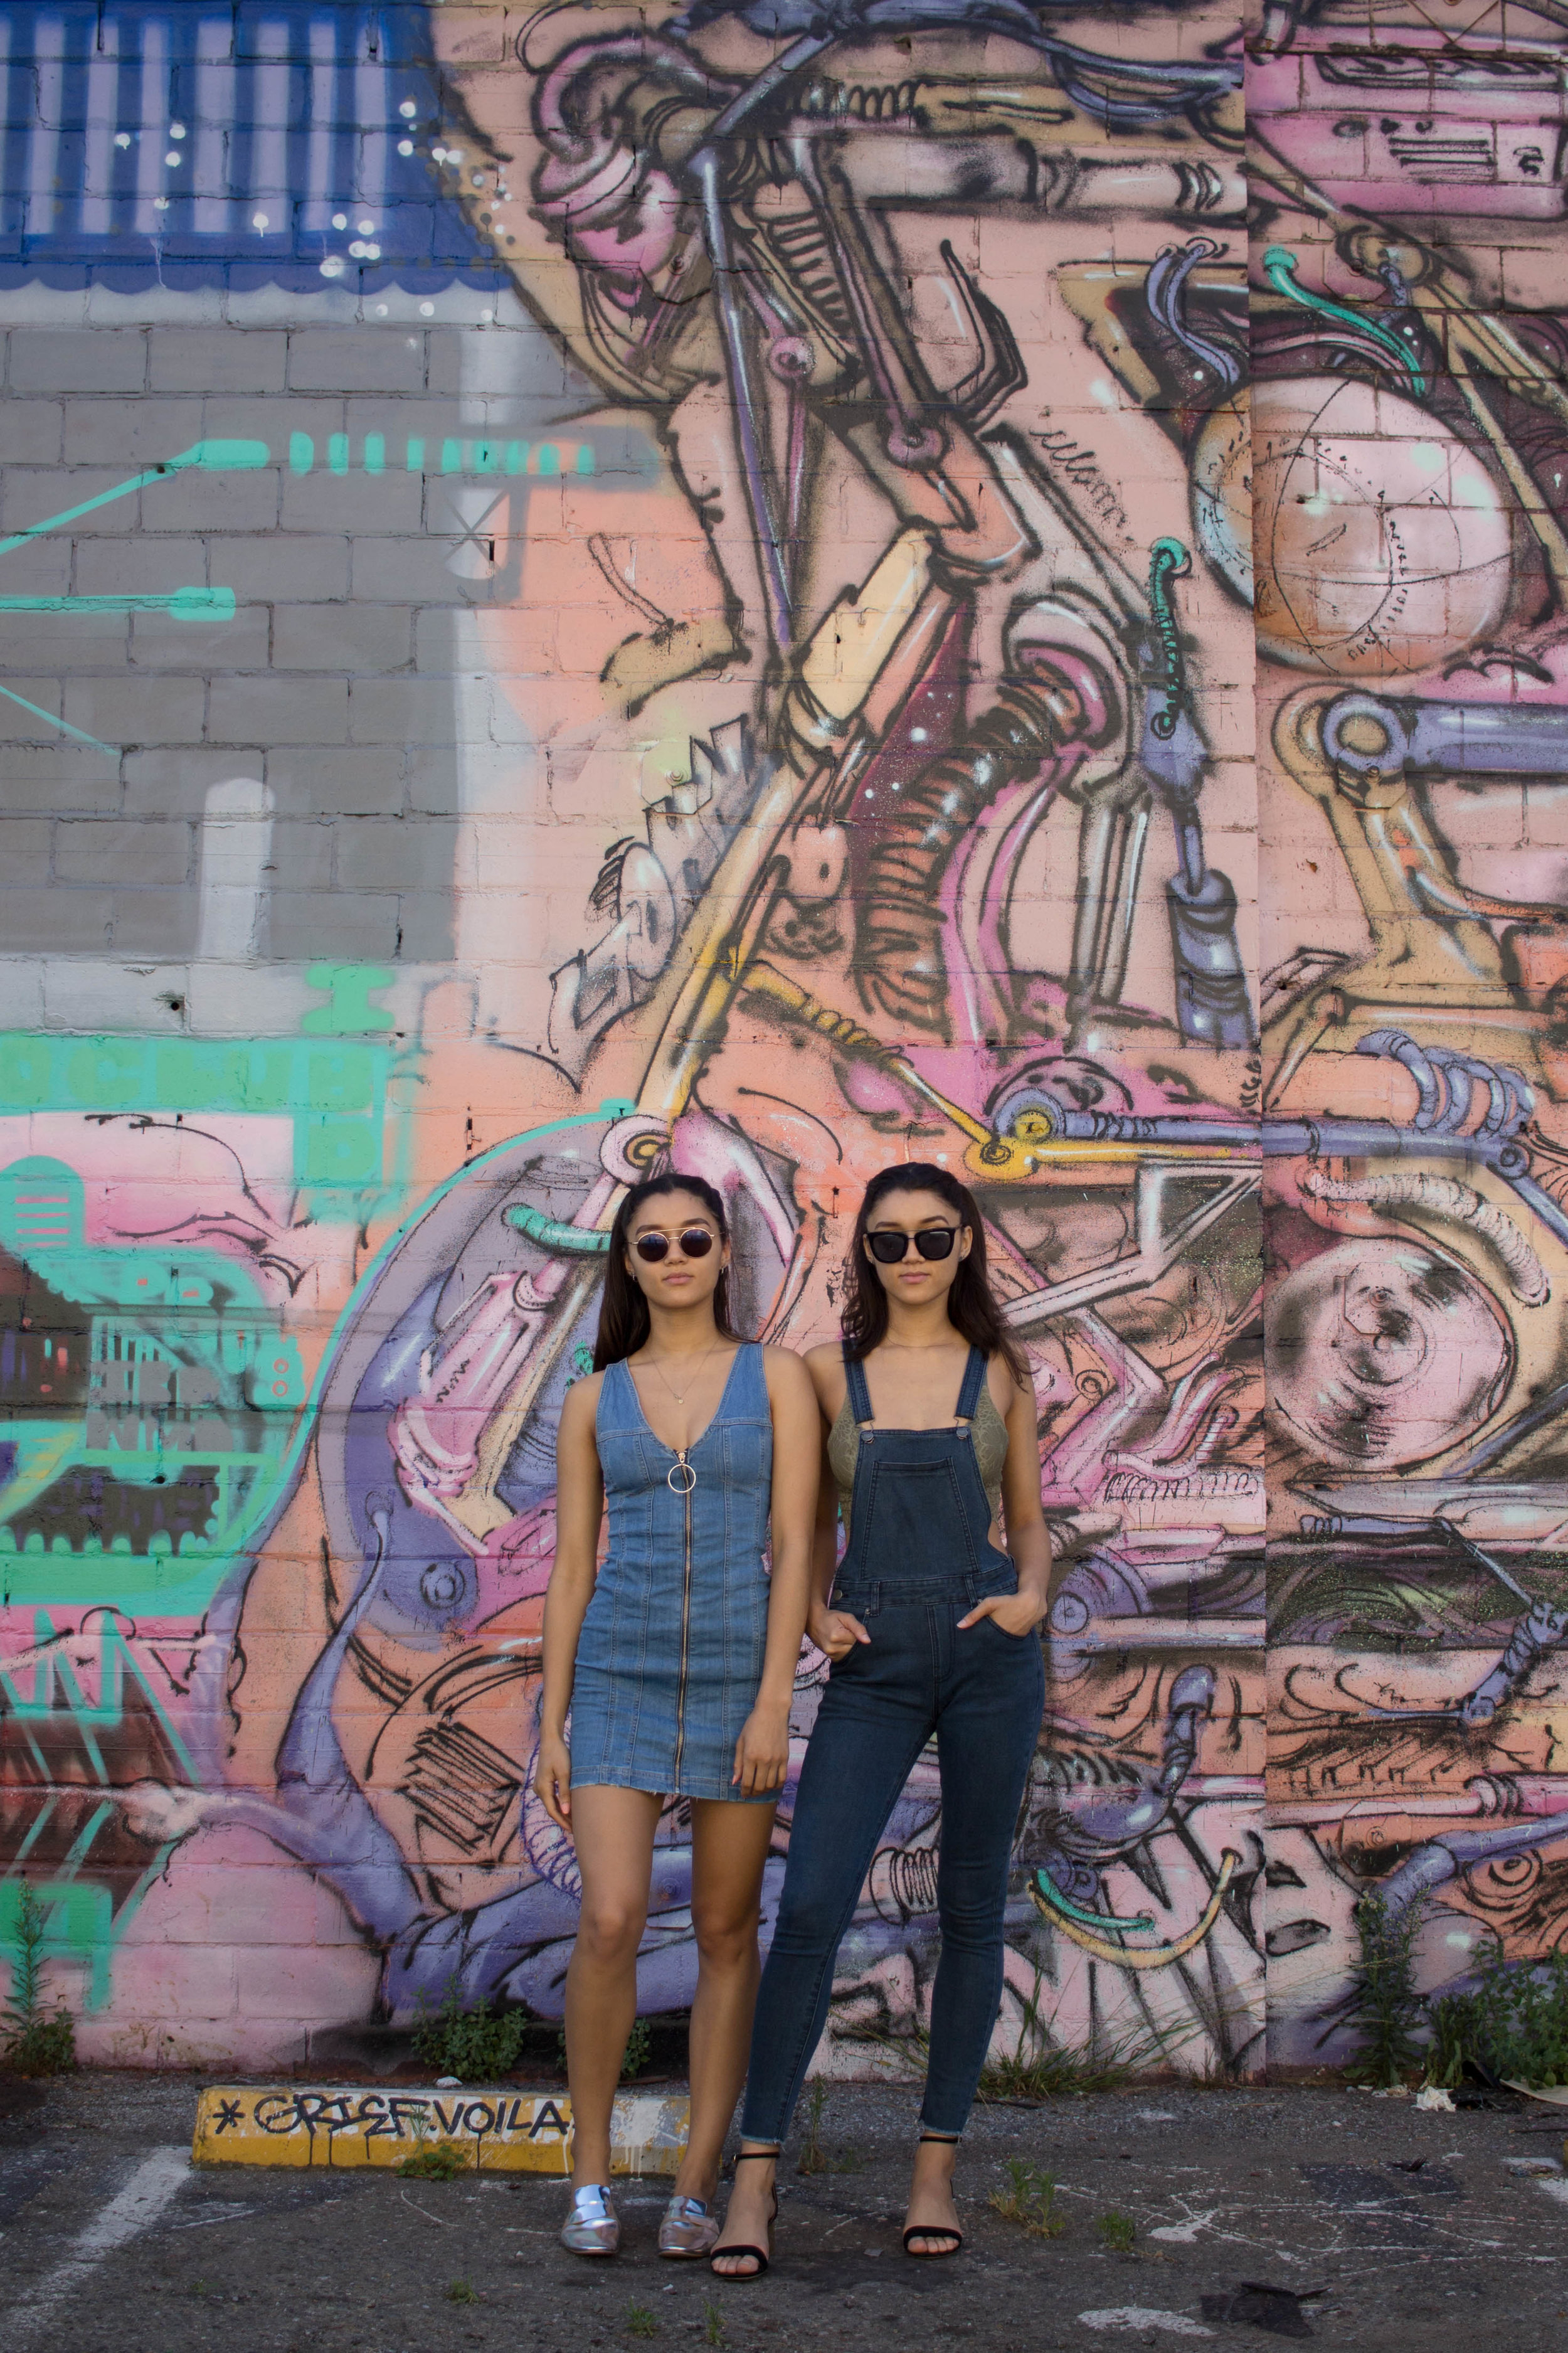  Twins standing infant of pink and pastel graffiti-ed wall. Woman wearing sunglasses and one wearing a denim dress and the other wearing dark denim overalls. 